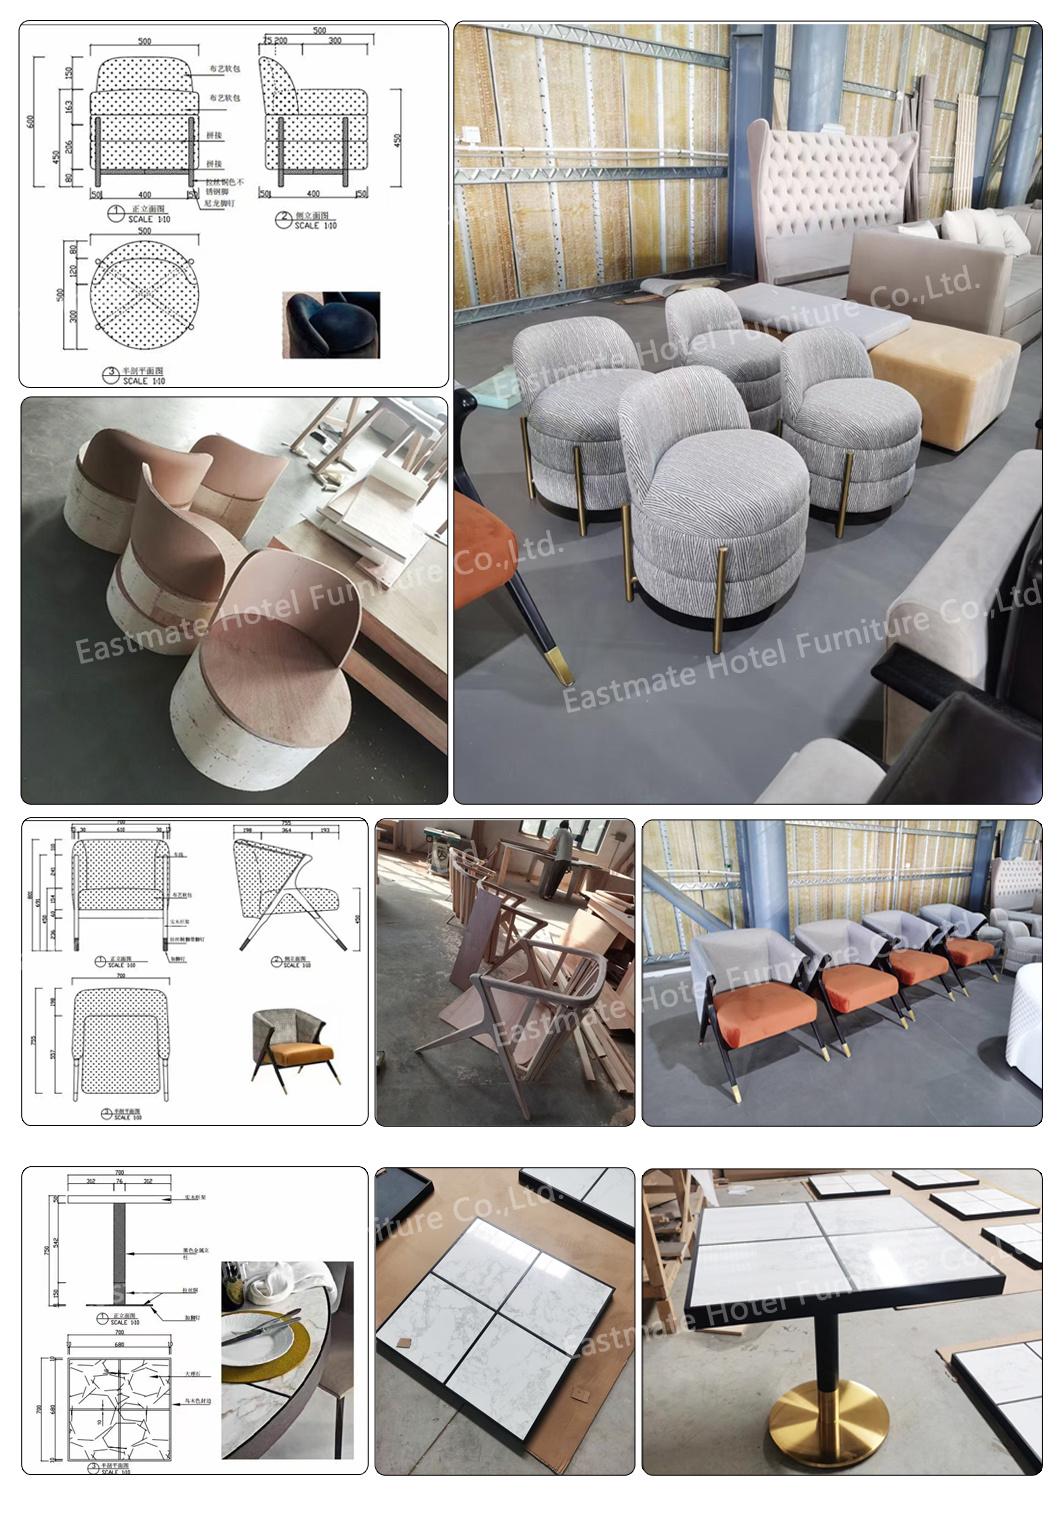 Hotel Furniture Shunde Hotel Project Furniture Concise Design for 5 Star Hotel